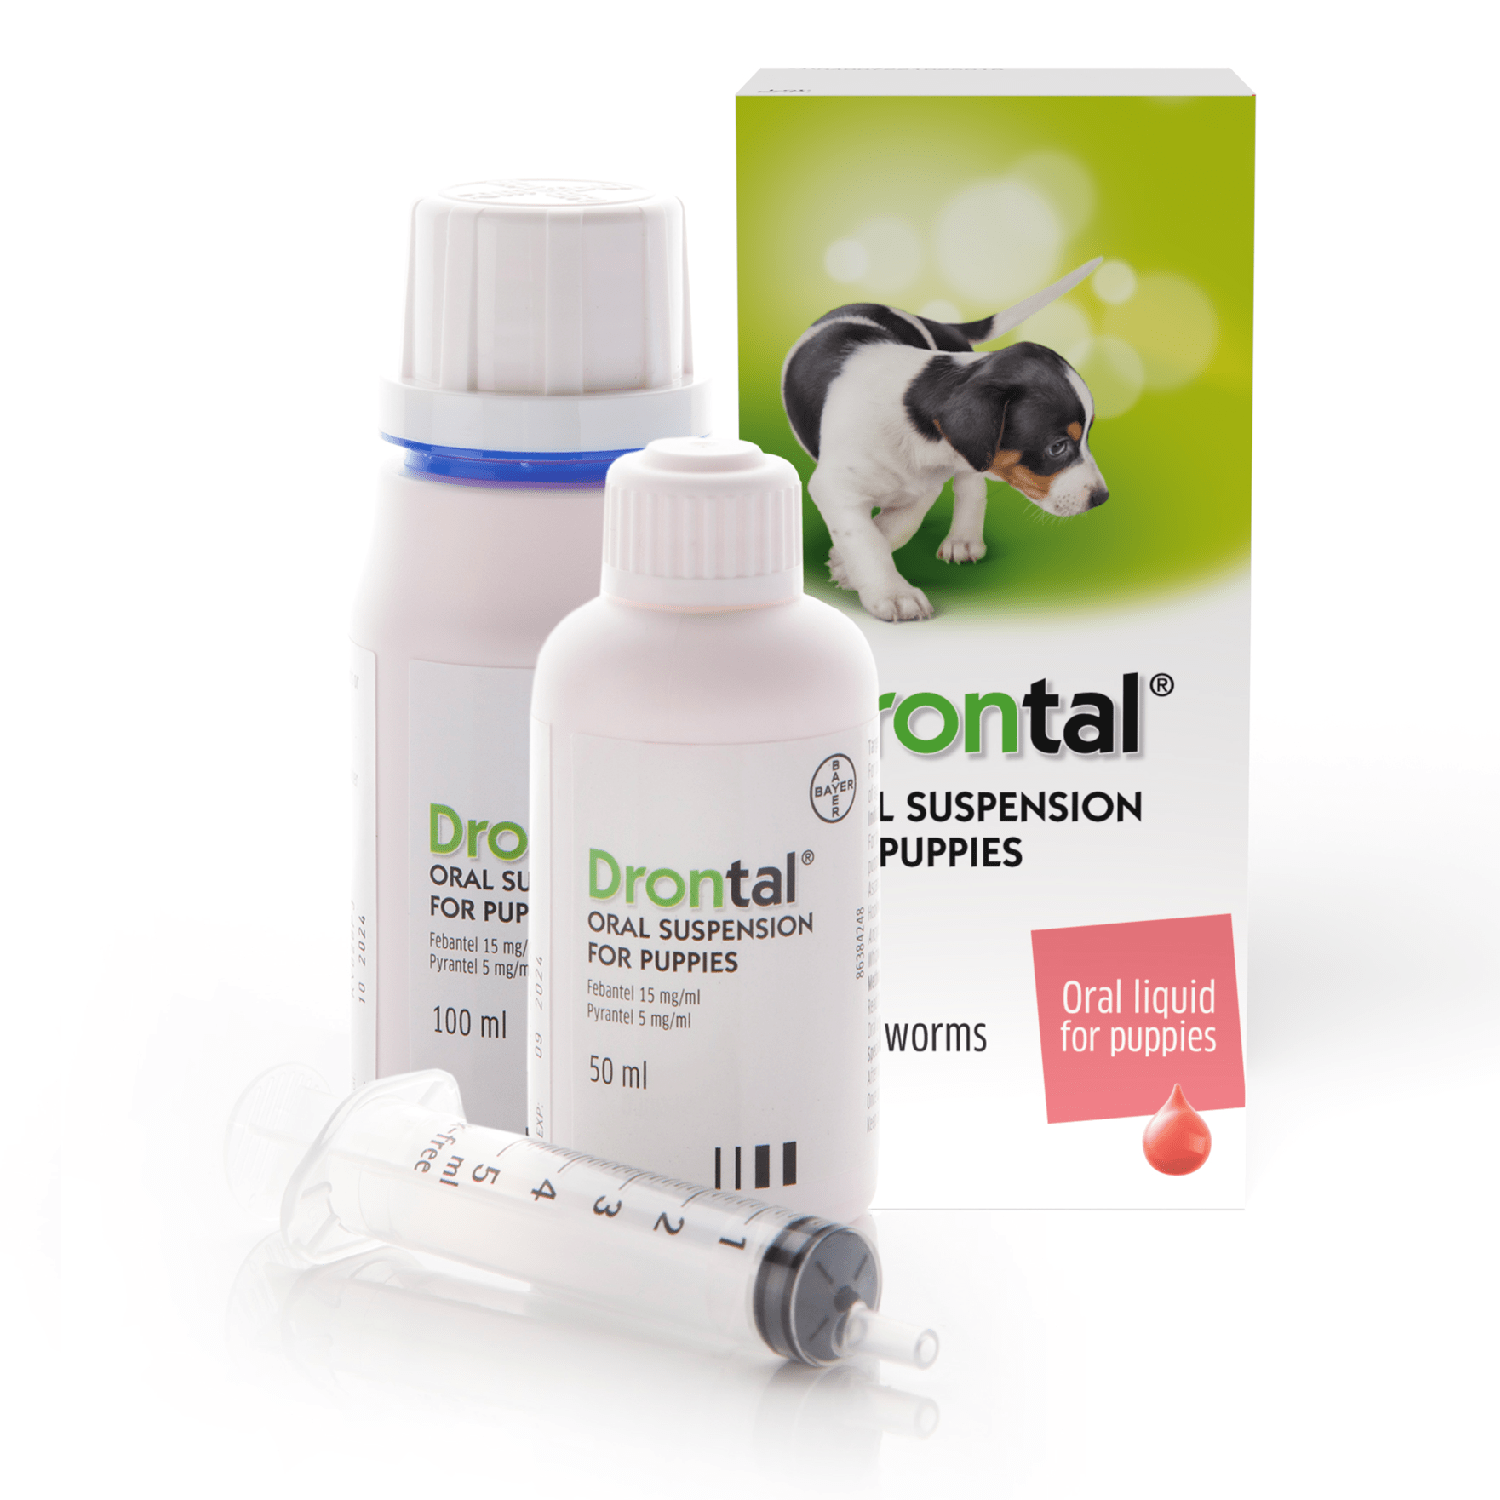 drontal liquid wormer for puppies